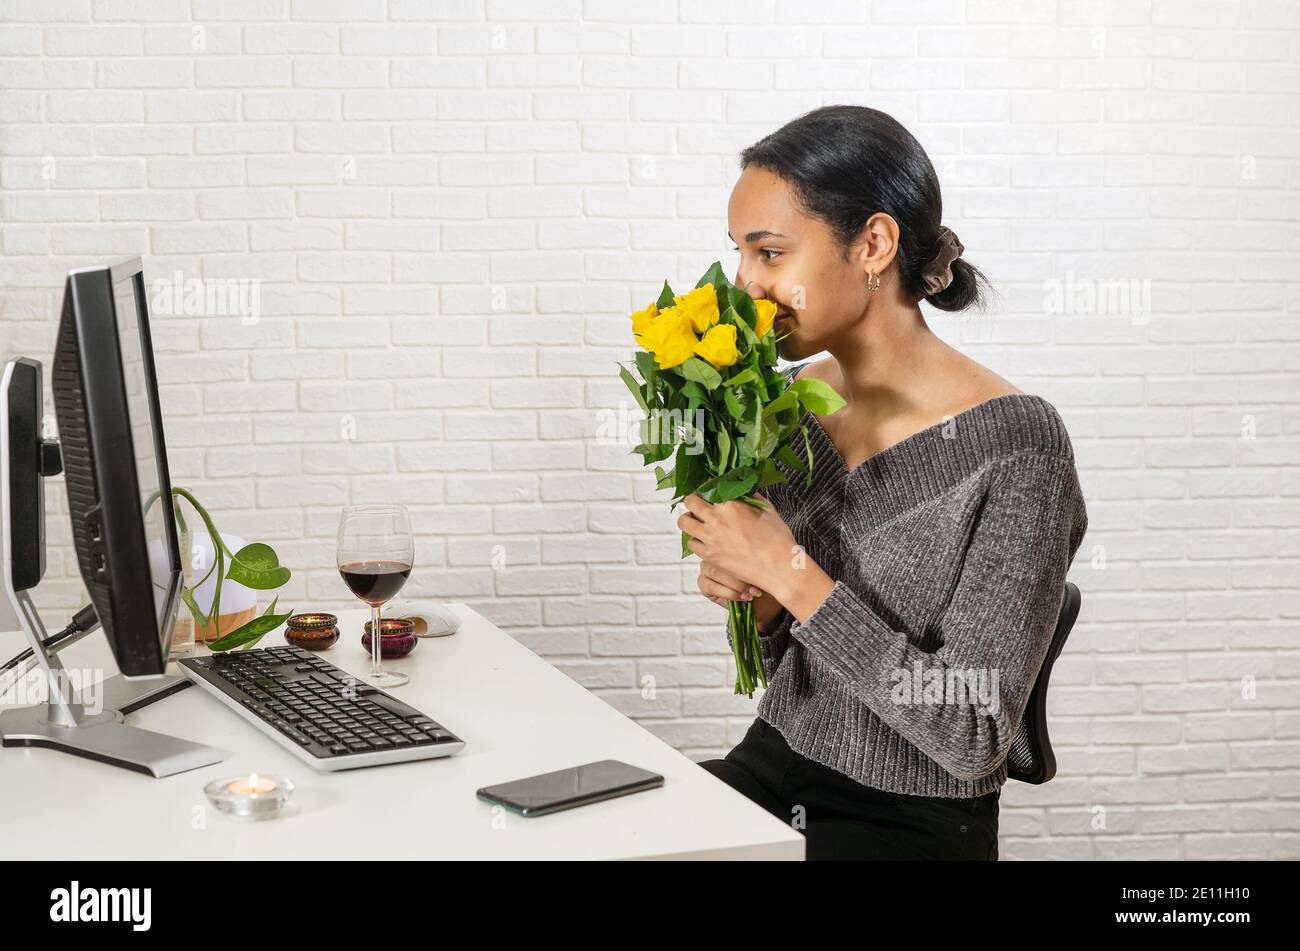 Young pretty mixed-raced woman holds a bunch of yellow roses in front of her face and speaking online Stock Photo